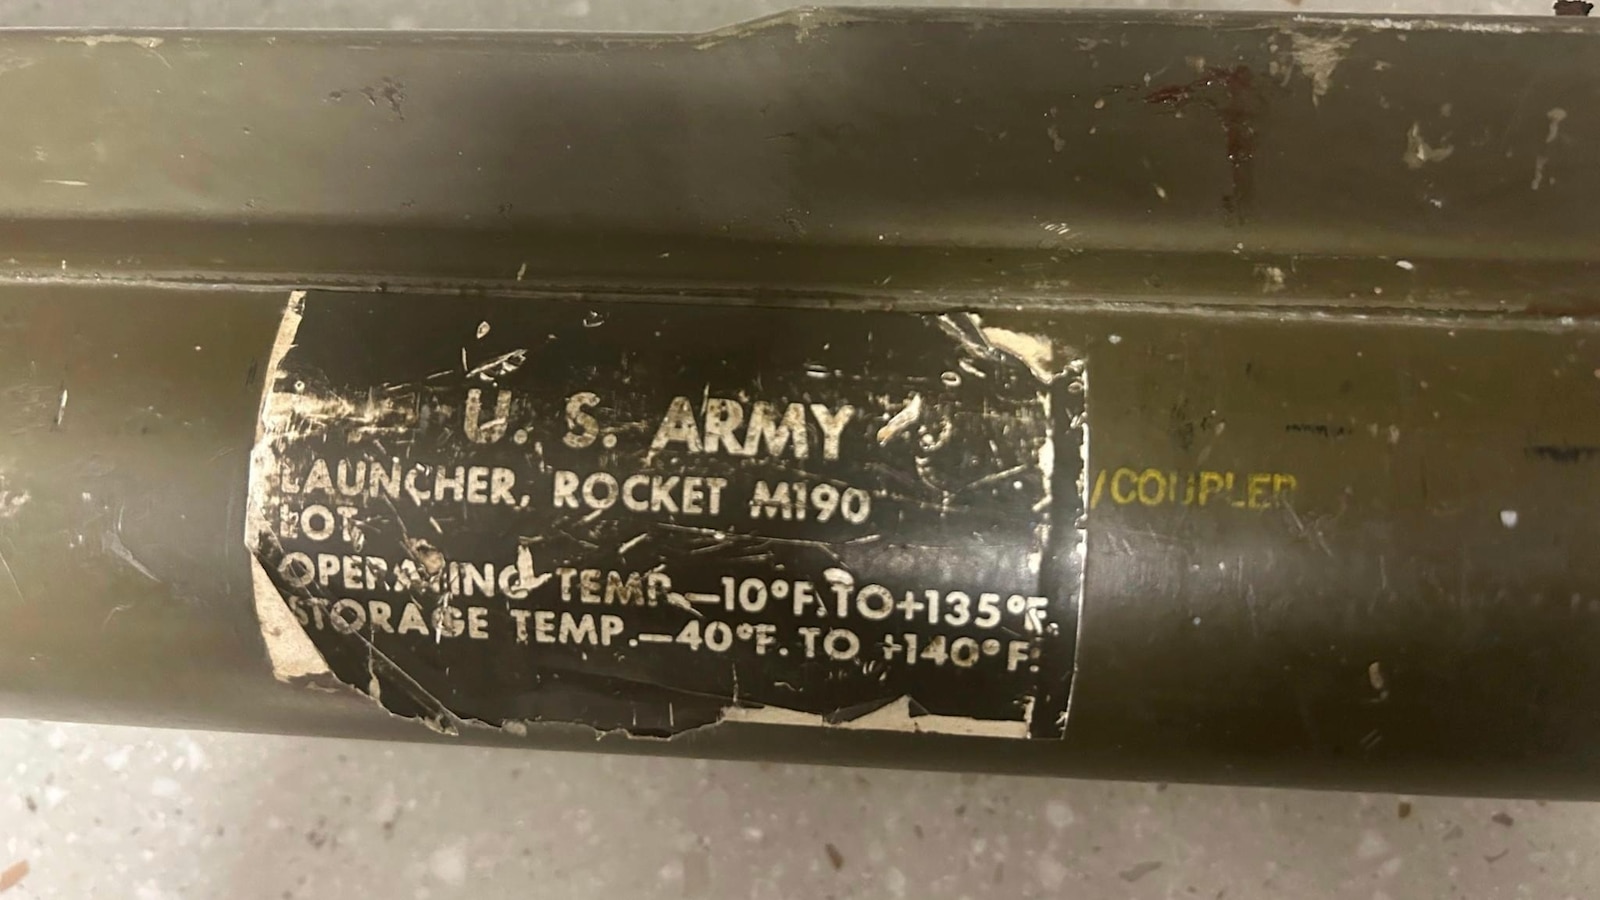 Cocaine and US Army rocket launcher discovered during police car search